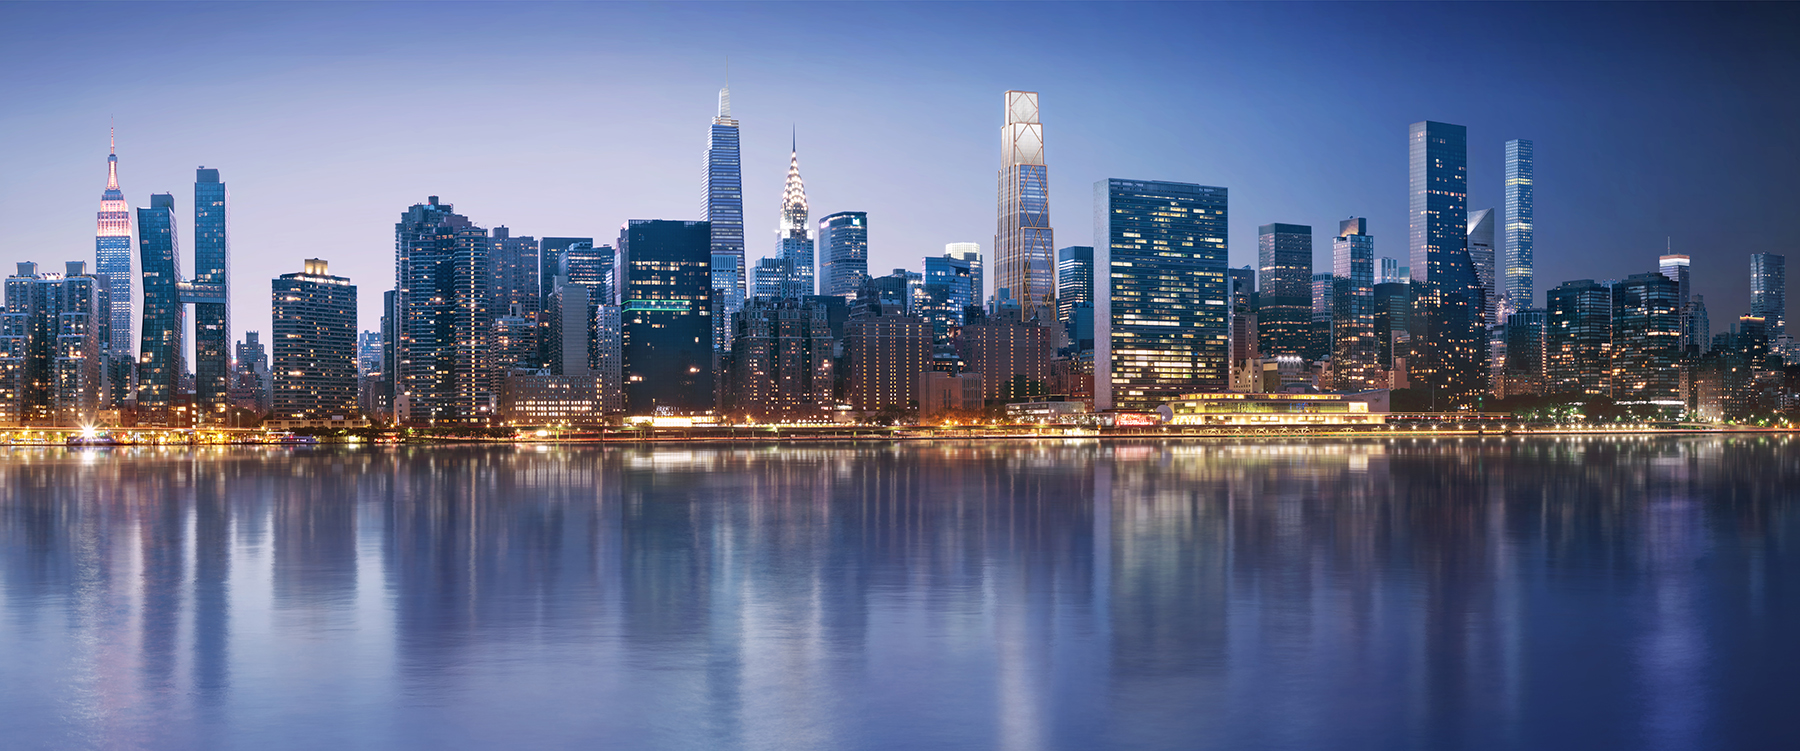 SKYLINE OF NYC WITH RENDERING OF TOWER